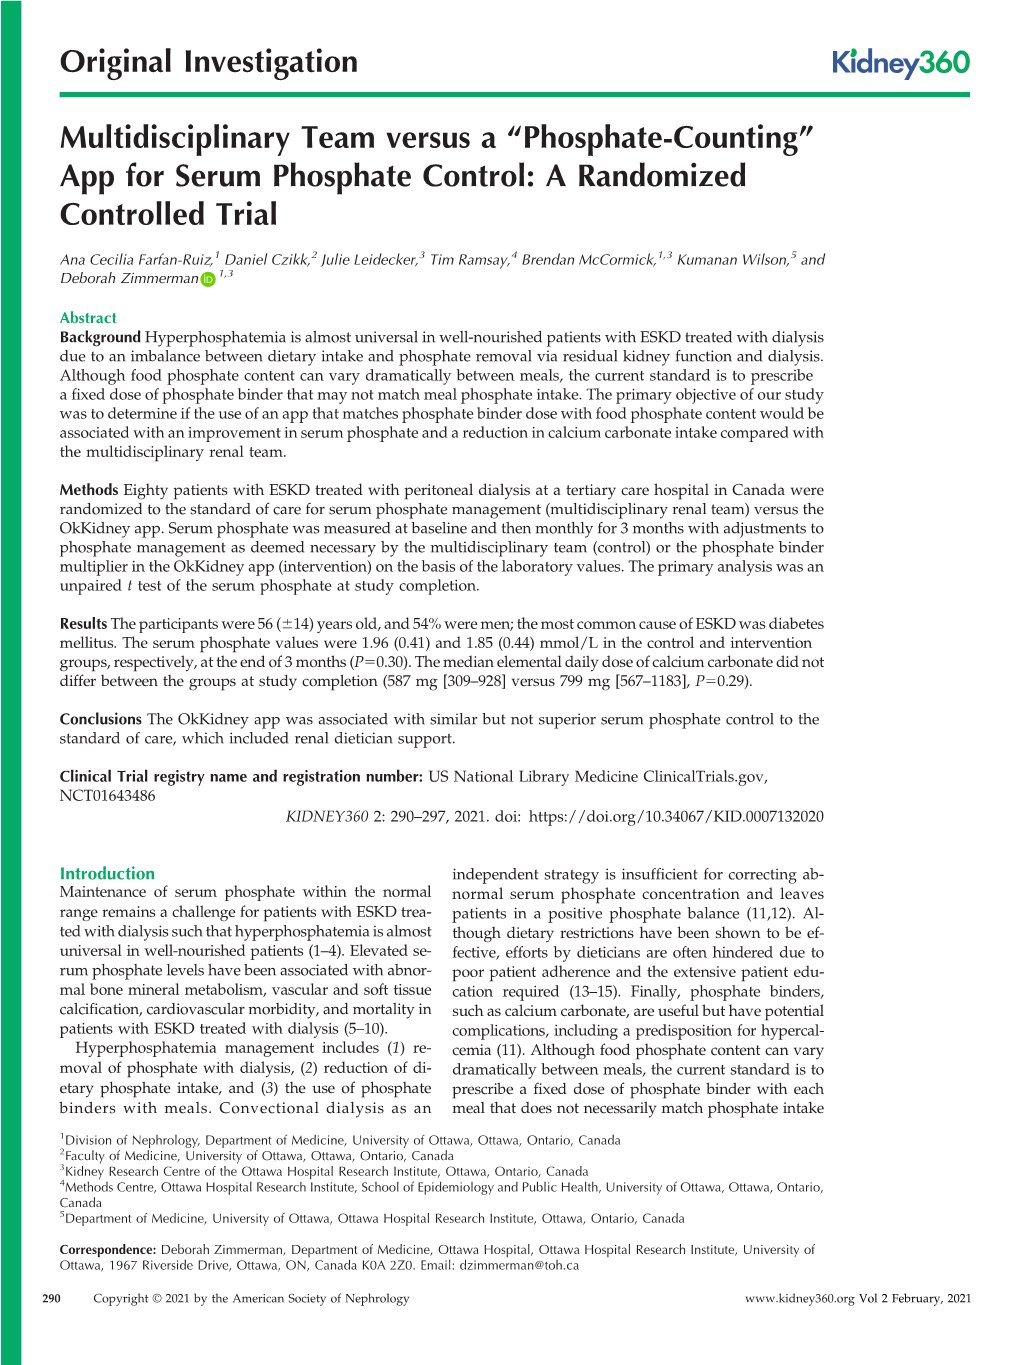 App for Serum Phosphate Control: a Randomized Controlled Trial